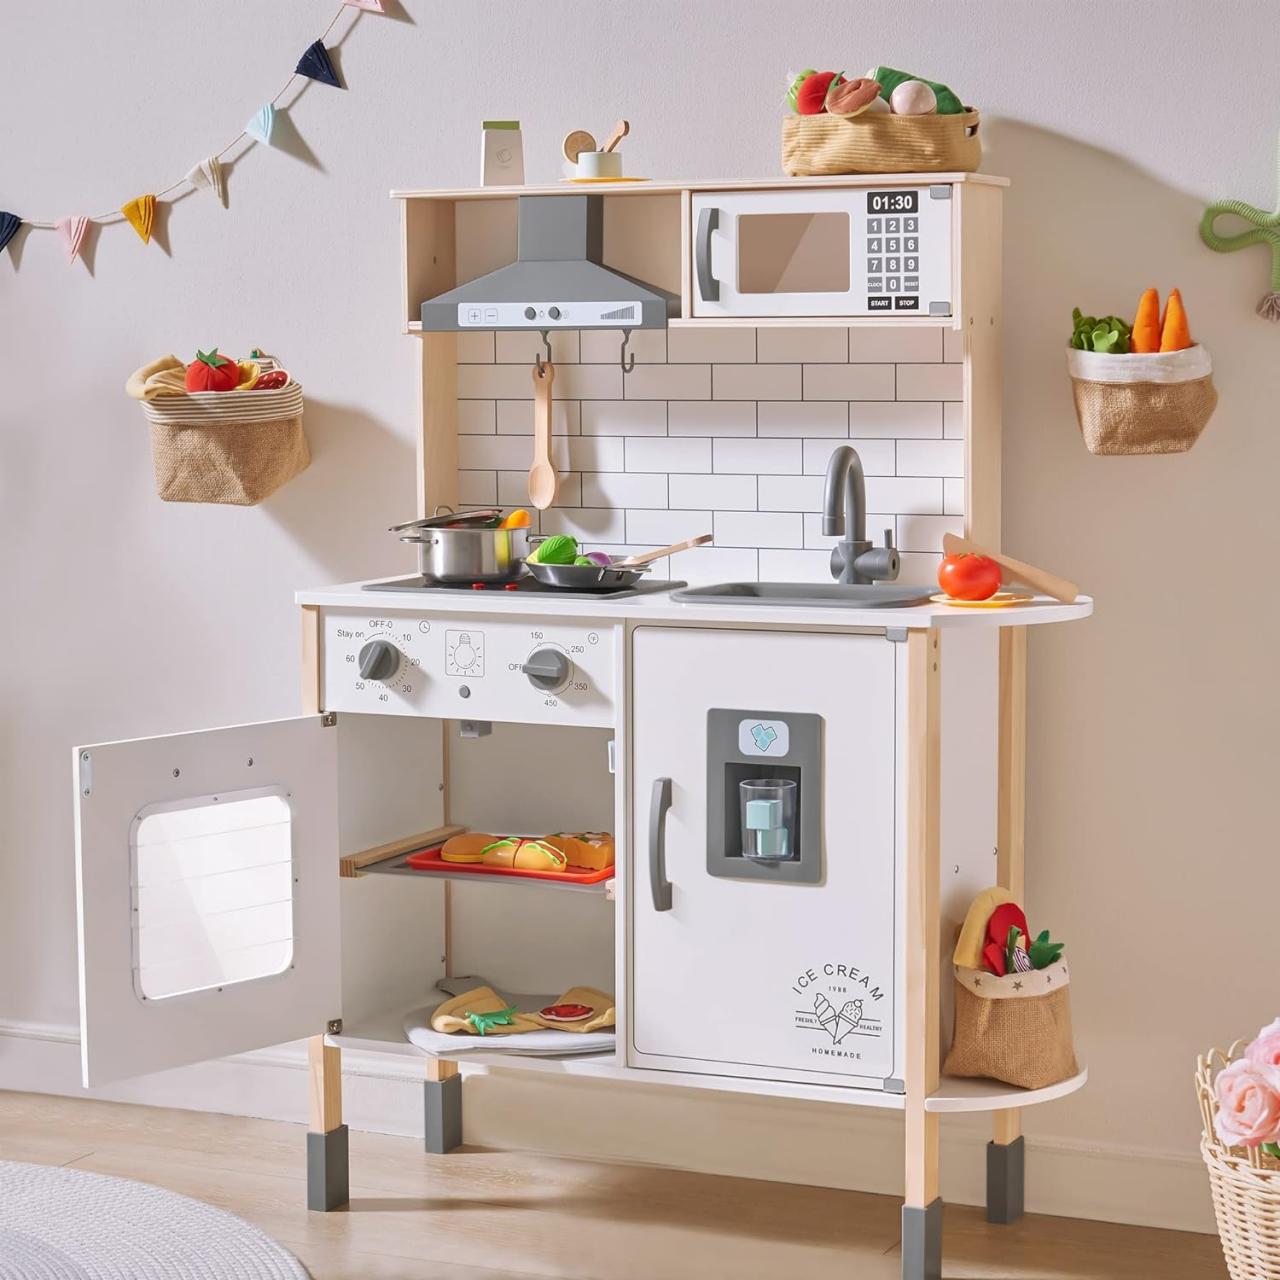 Easy Bake Kids Kitchen Appliances in Play Food & Accessories 